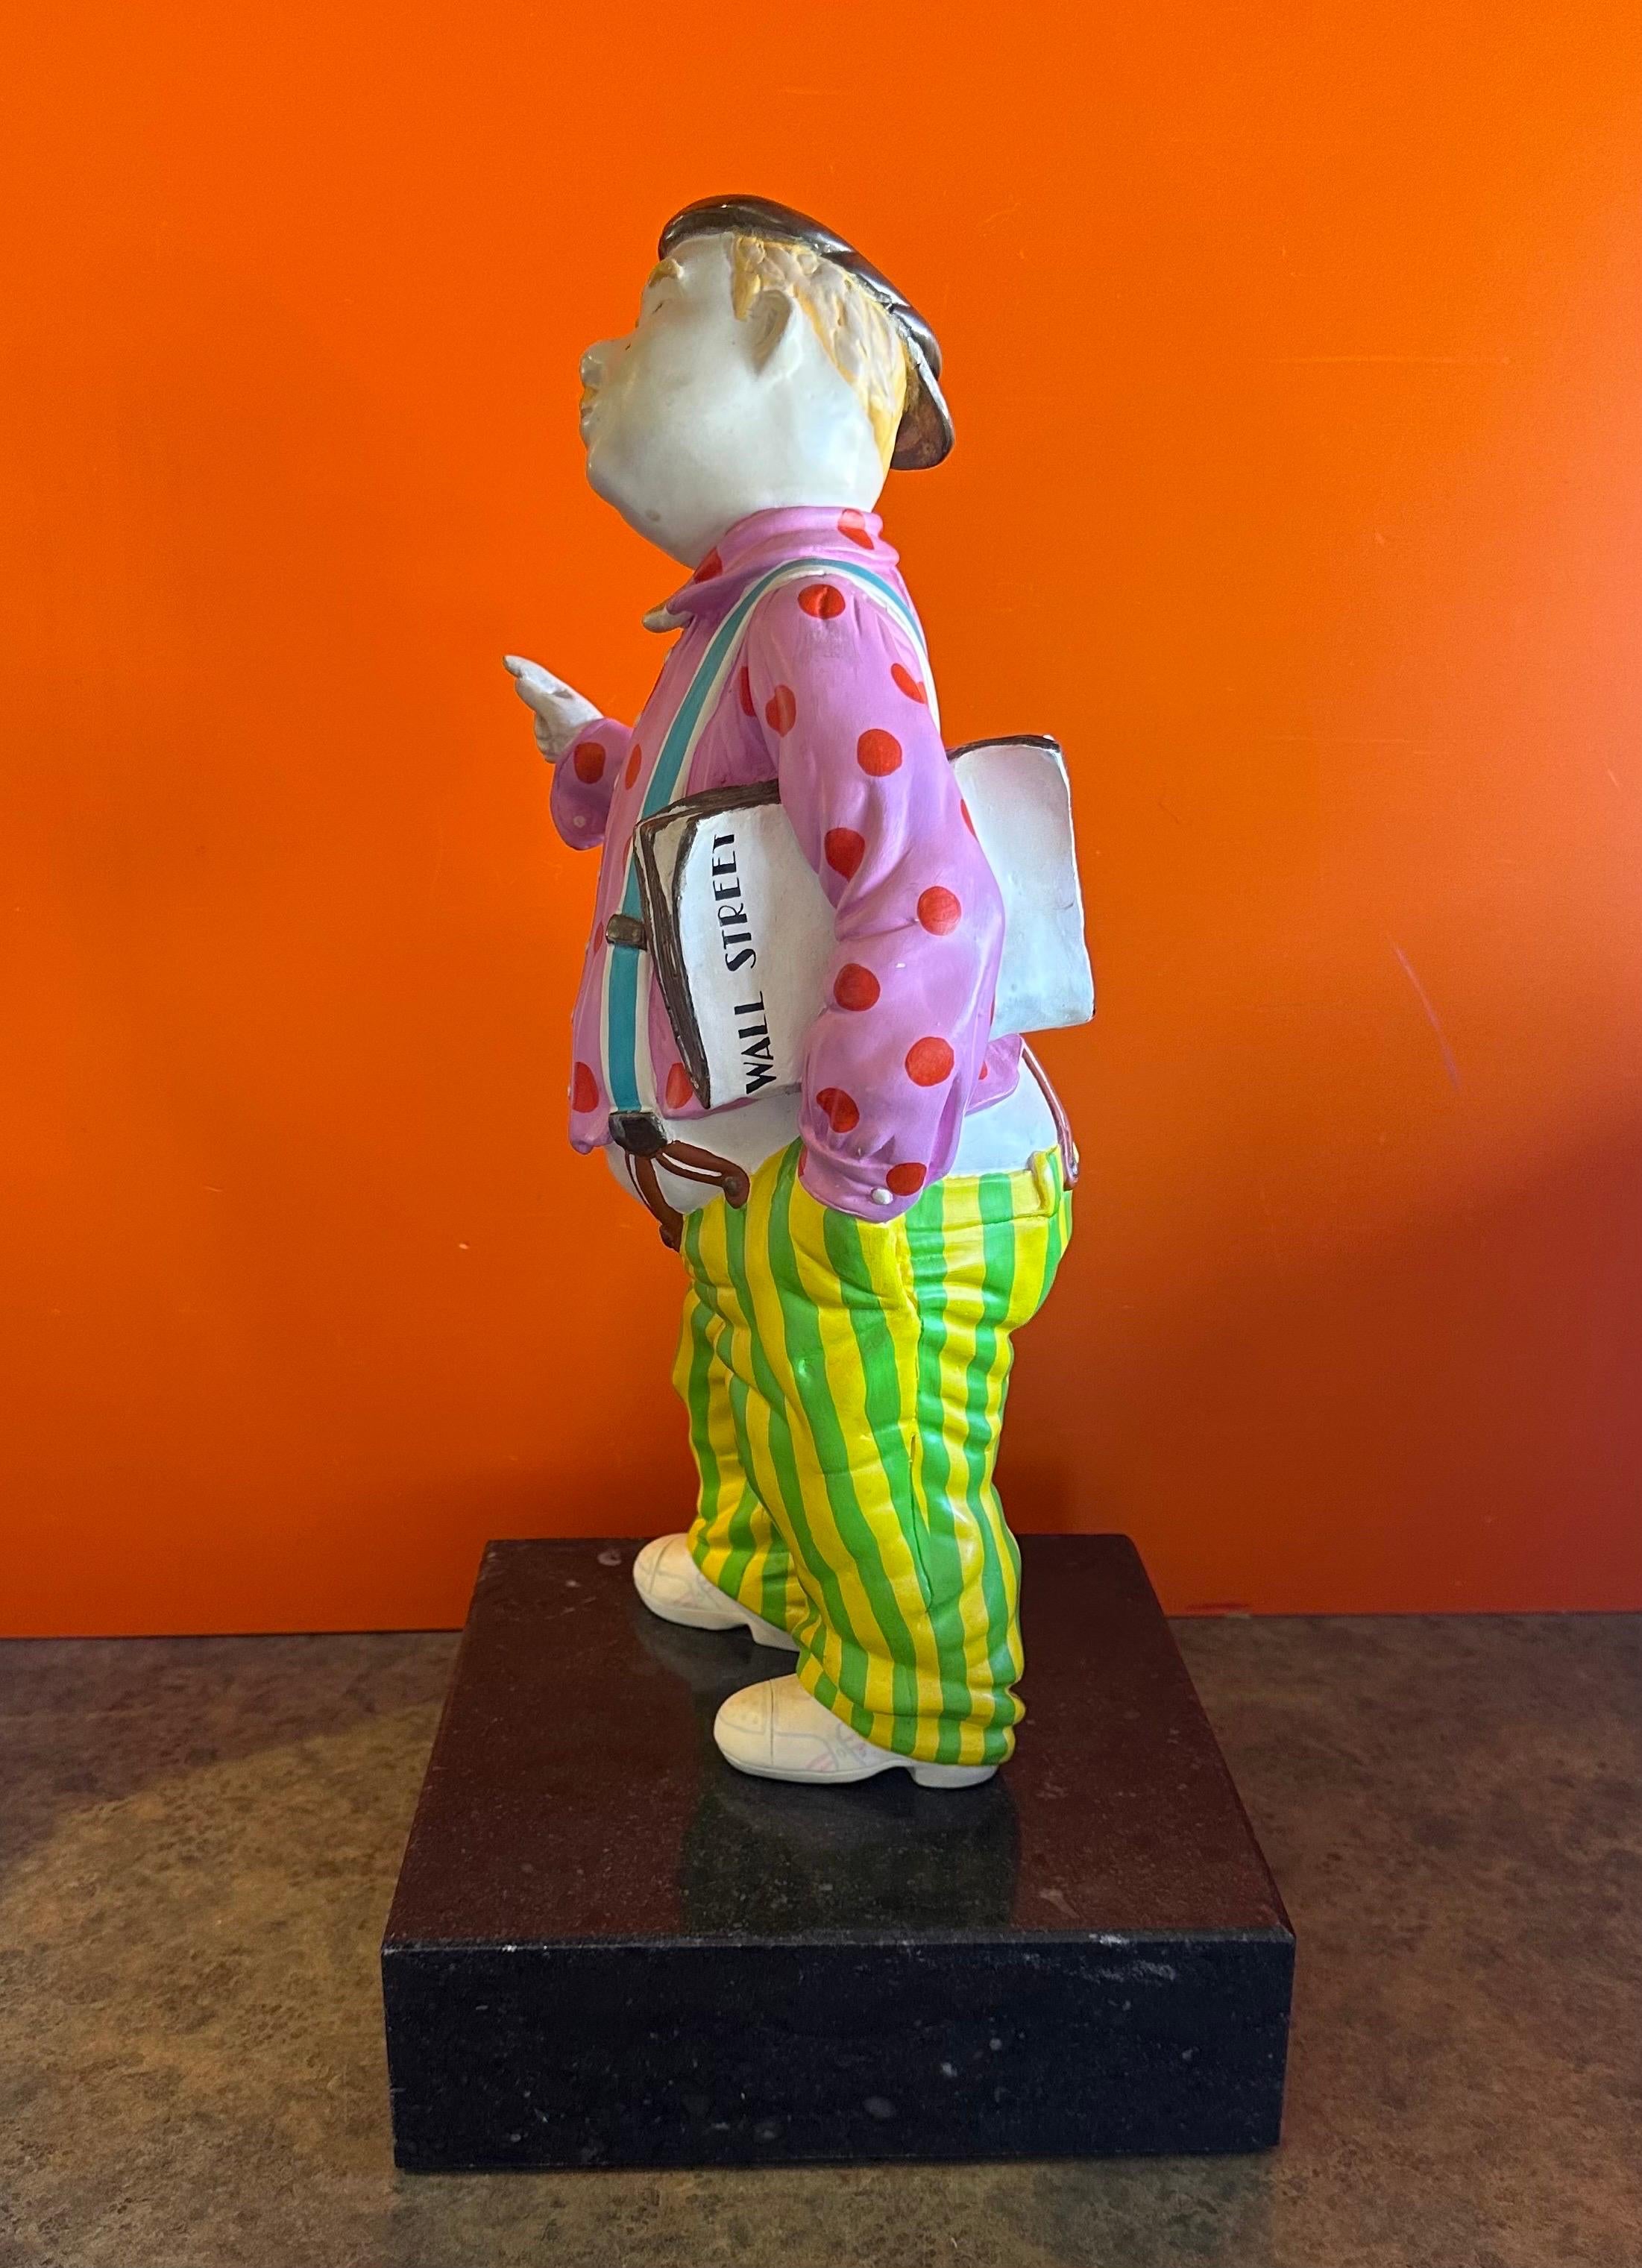 Painted Limited Edition Bronze Clown Sculpture Entitled 